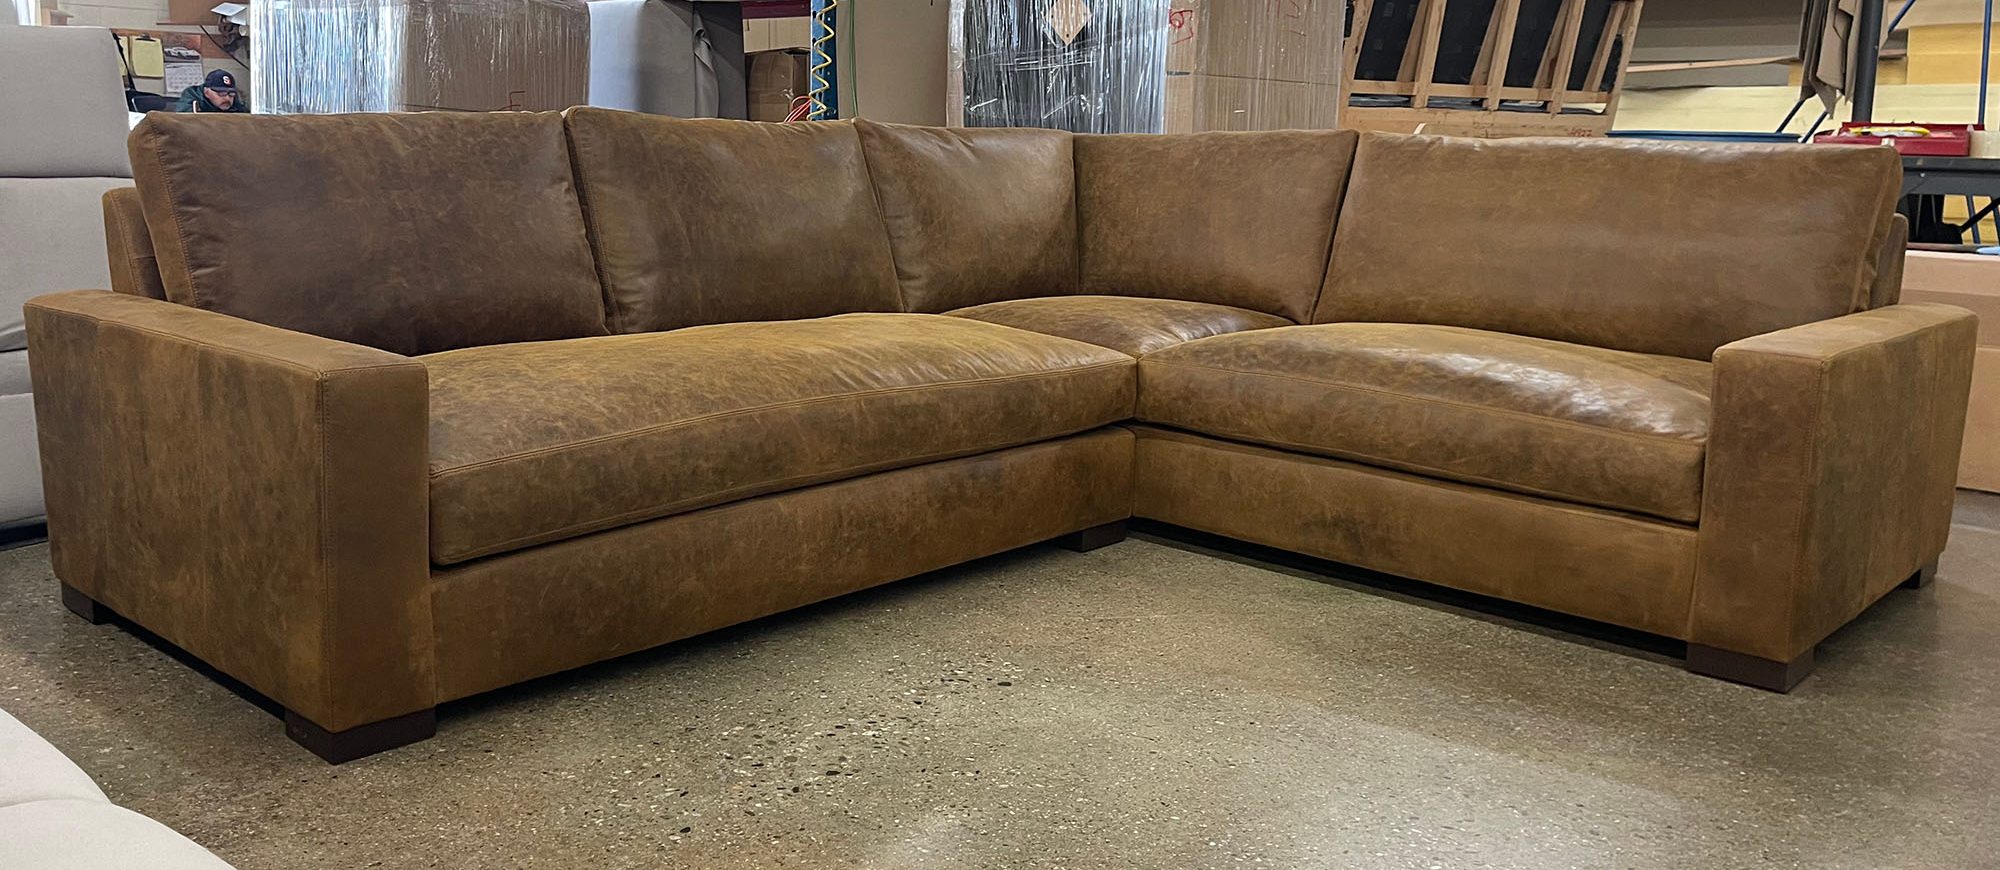 Braxton Mini L Sectional in Burnham Sycamore Aniline Nubuck Leather - front view